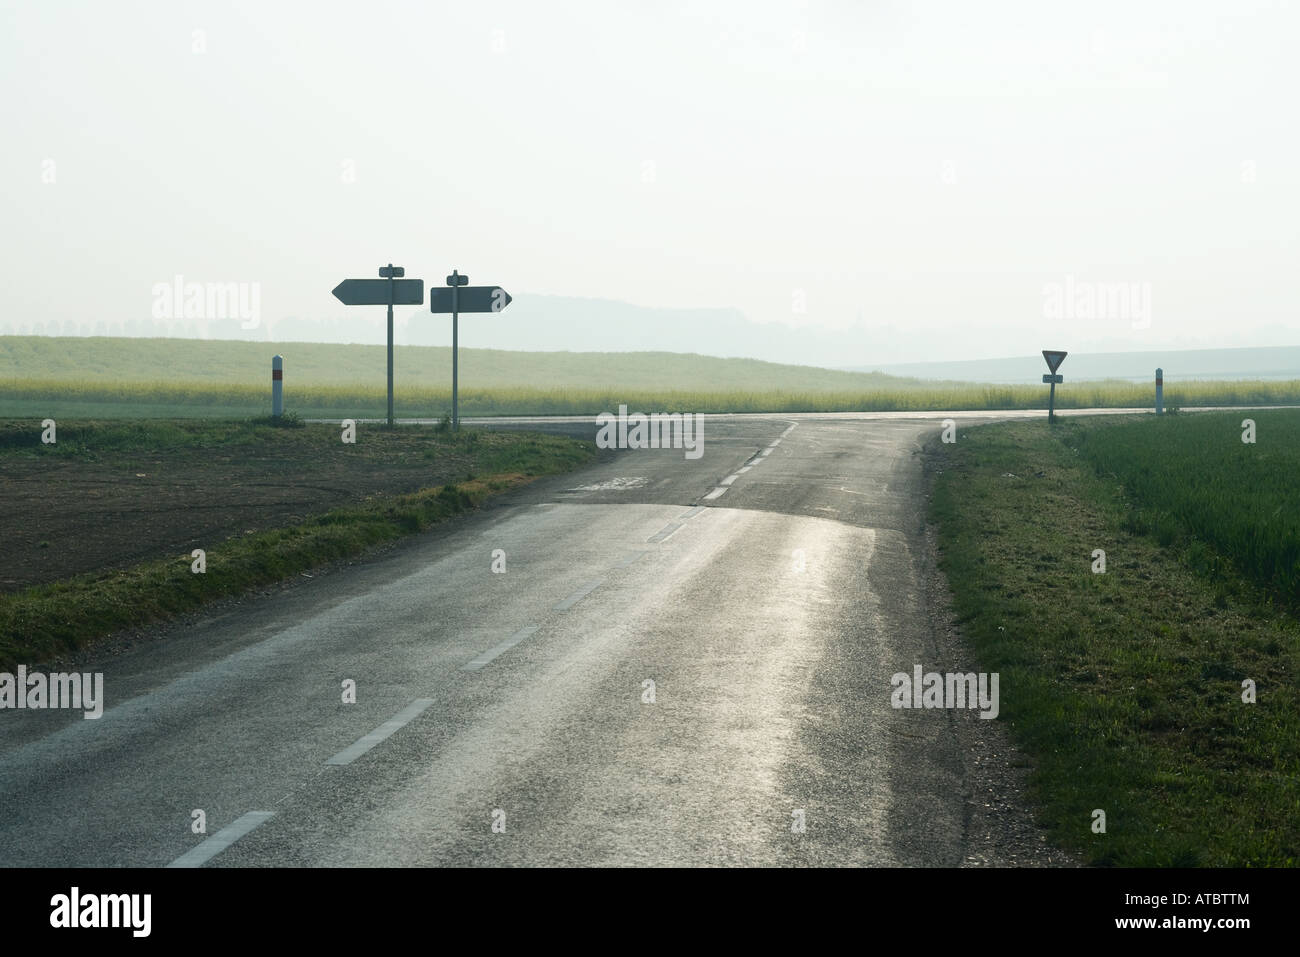 Forked road in countryside Stock Photo